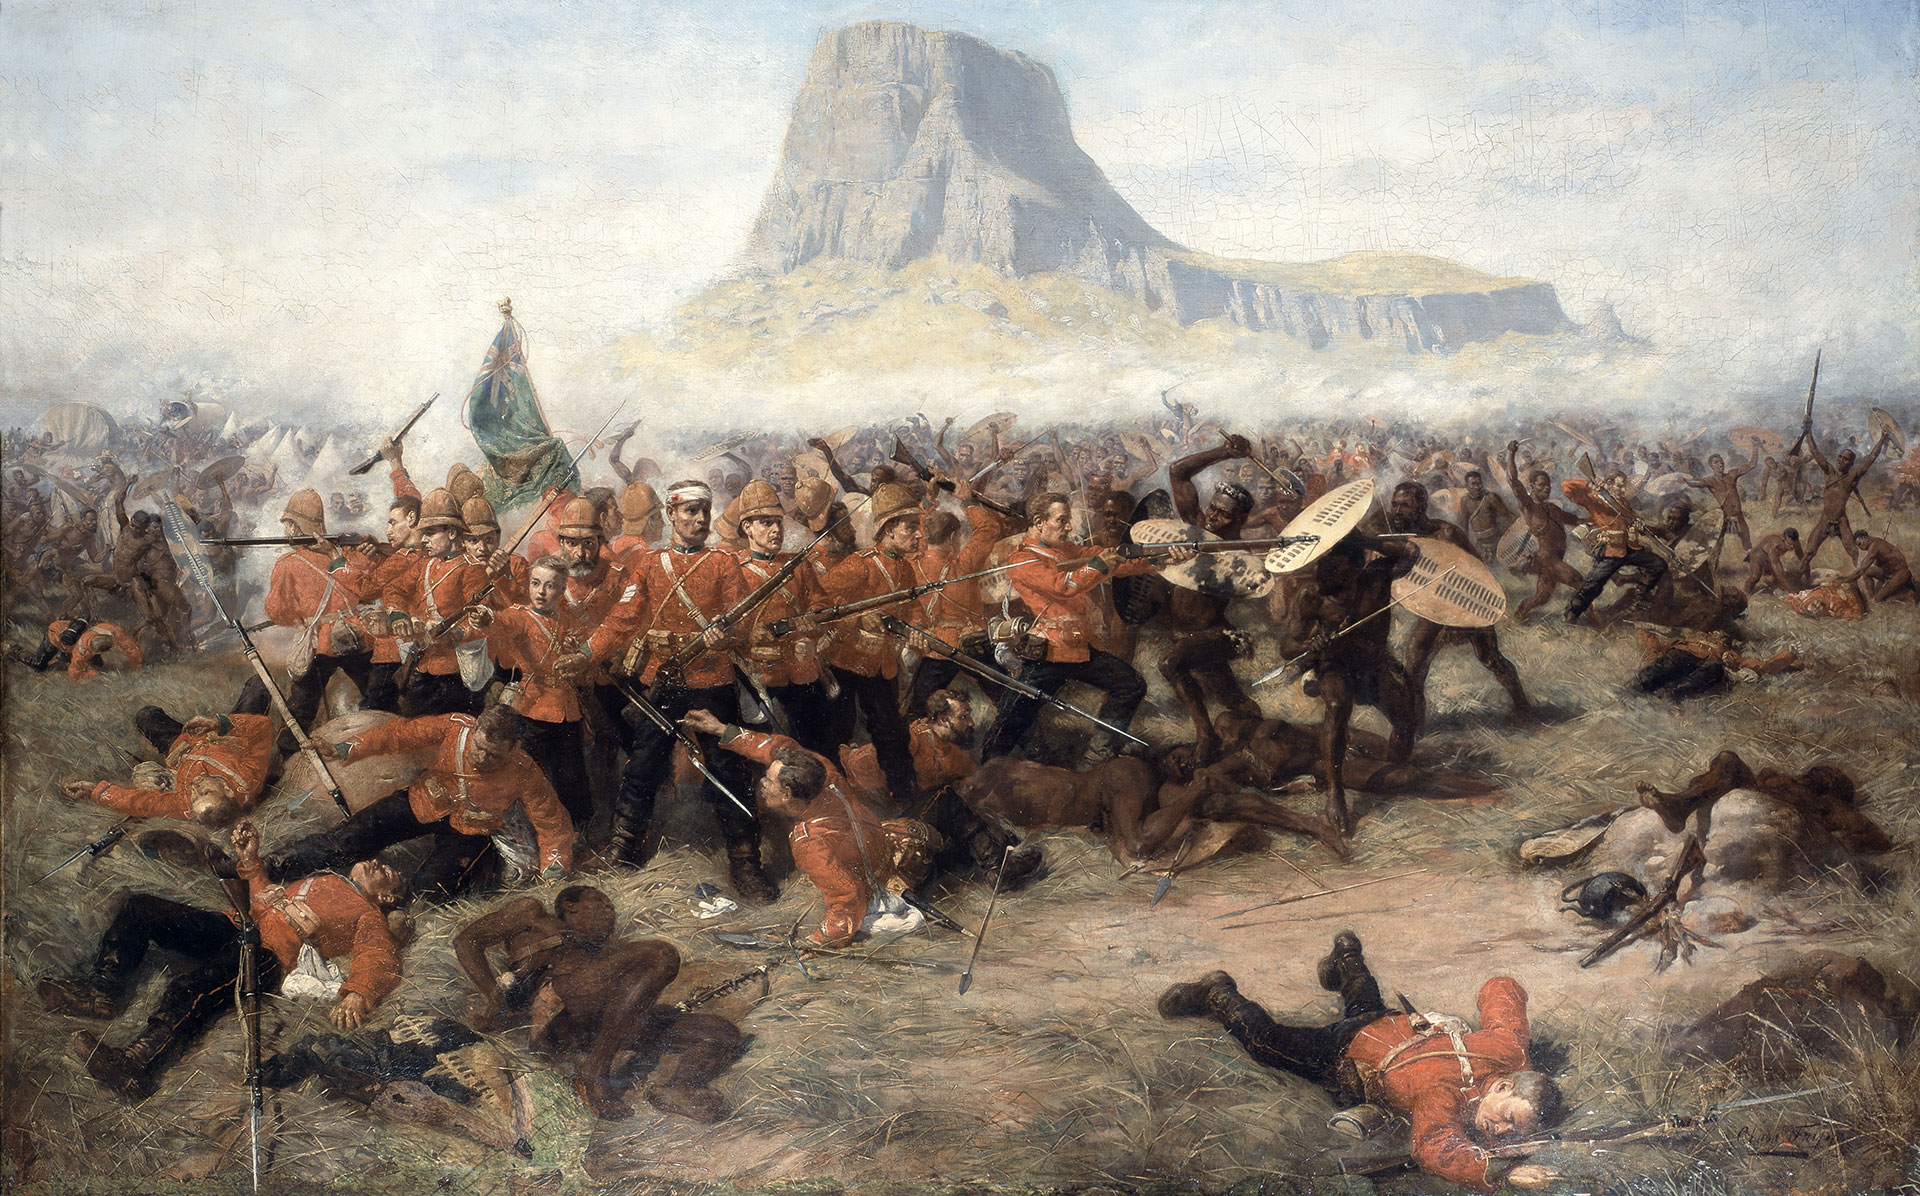 <p>British Governor-General Henry Bartle Frere instigates wars against the Xhosa, Zulu, Basotho and Boer states. Britain’s forces are humiliated on almost every front, but most spectacularly by Zulu regiments at Isandlwana.</p>